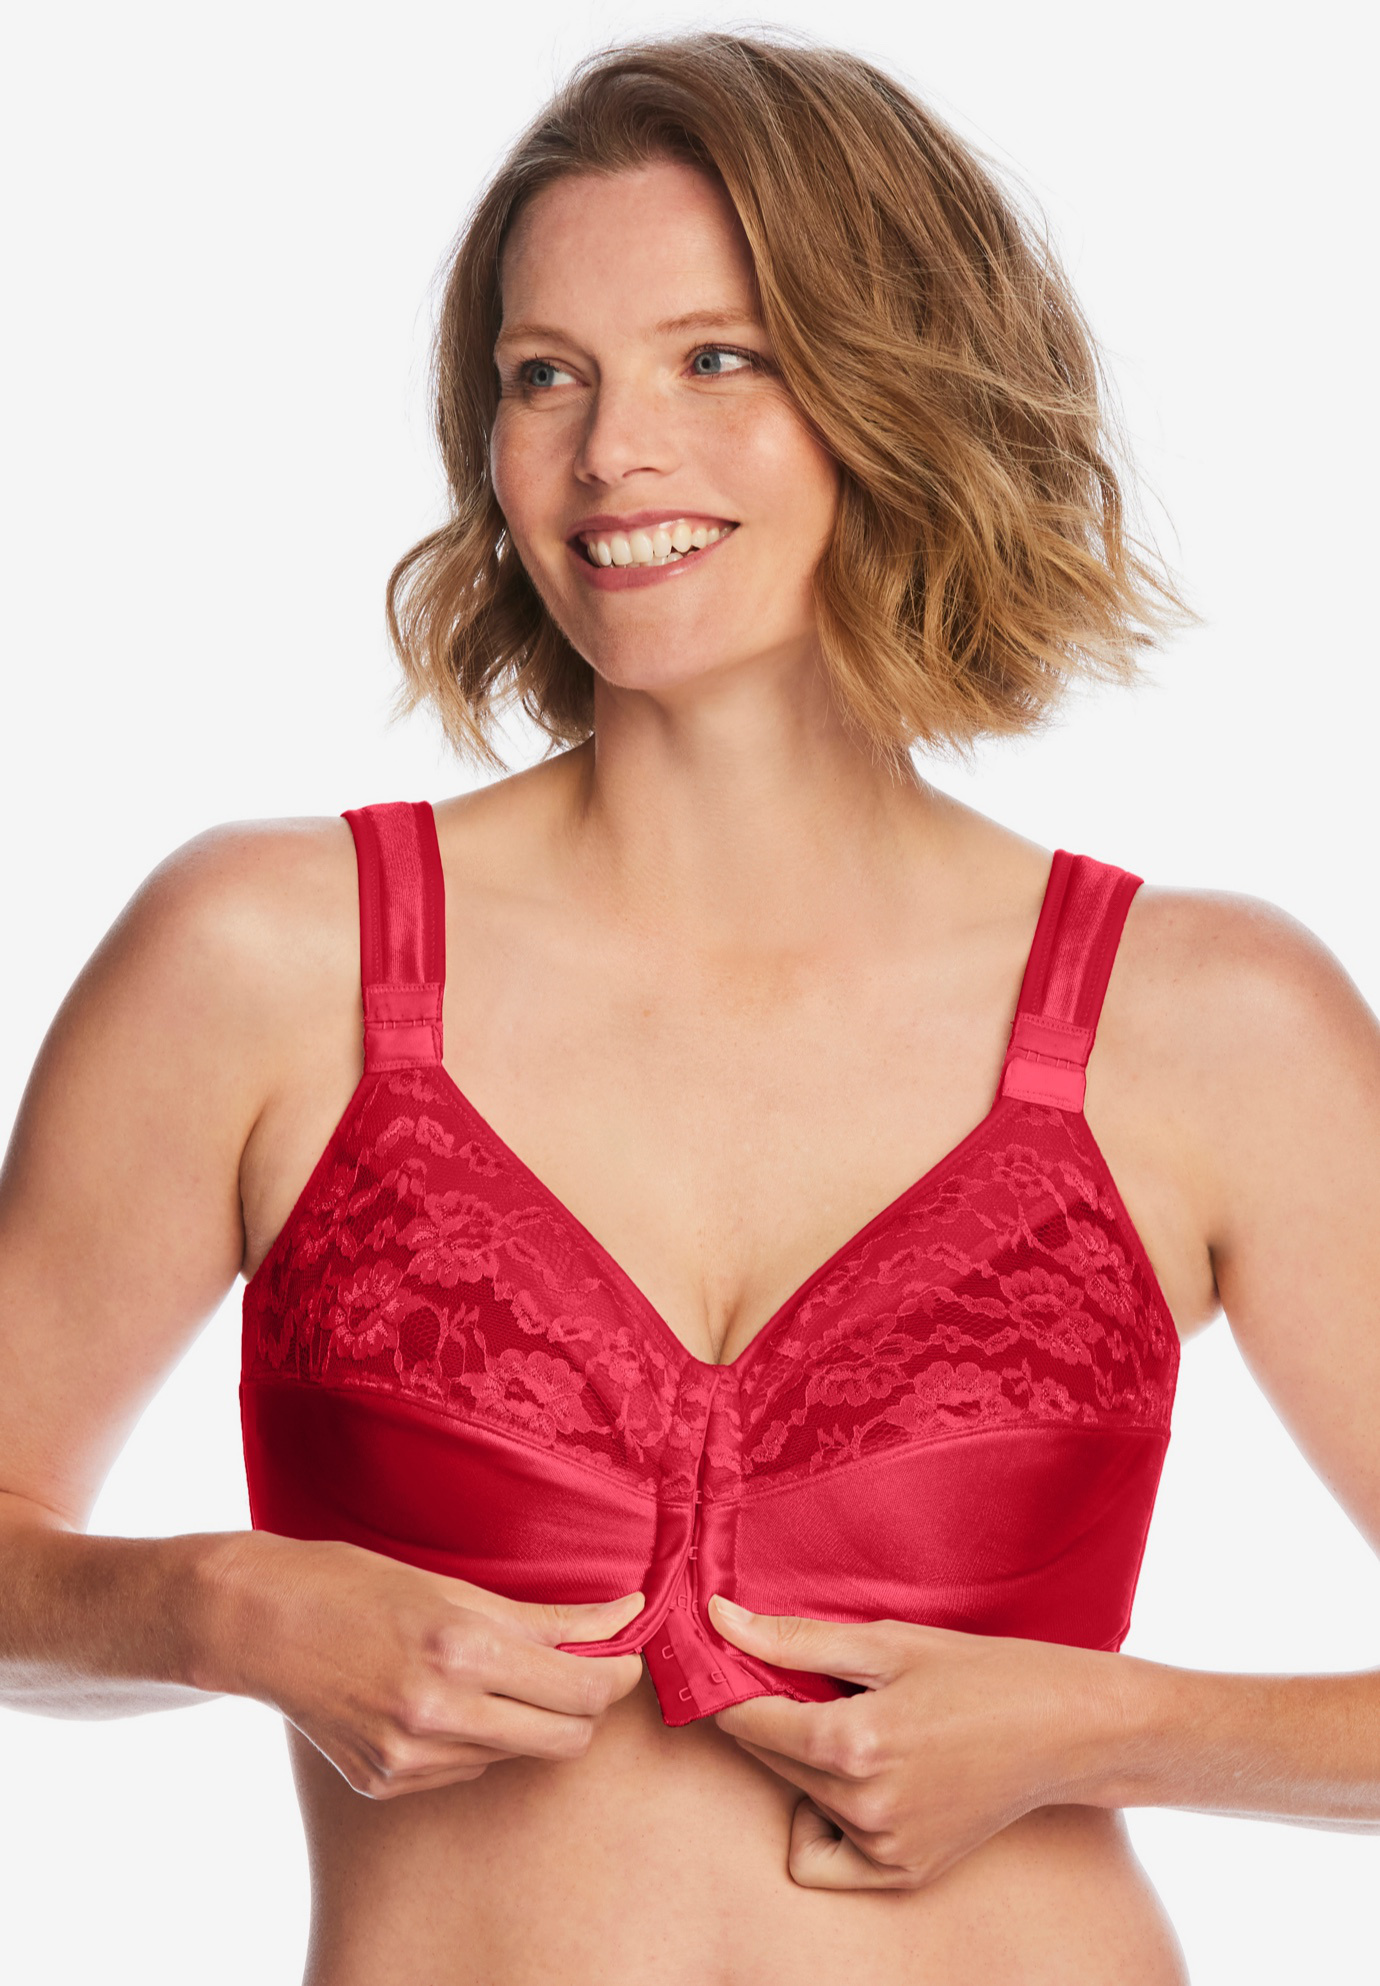 Up To 72% Off on Wired Half-cup Bras with Remo